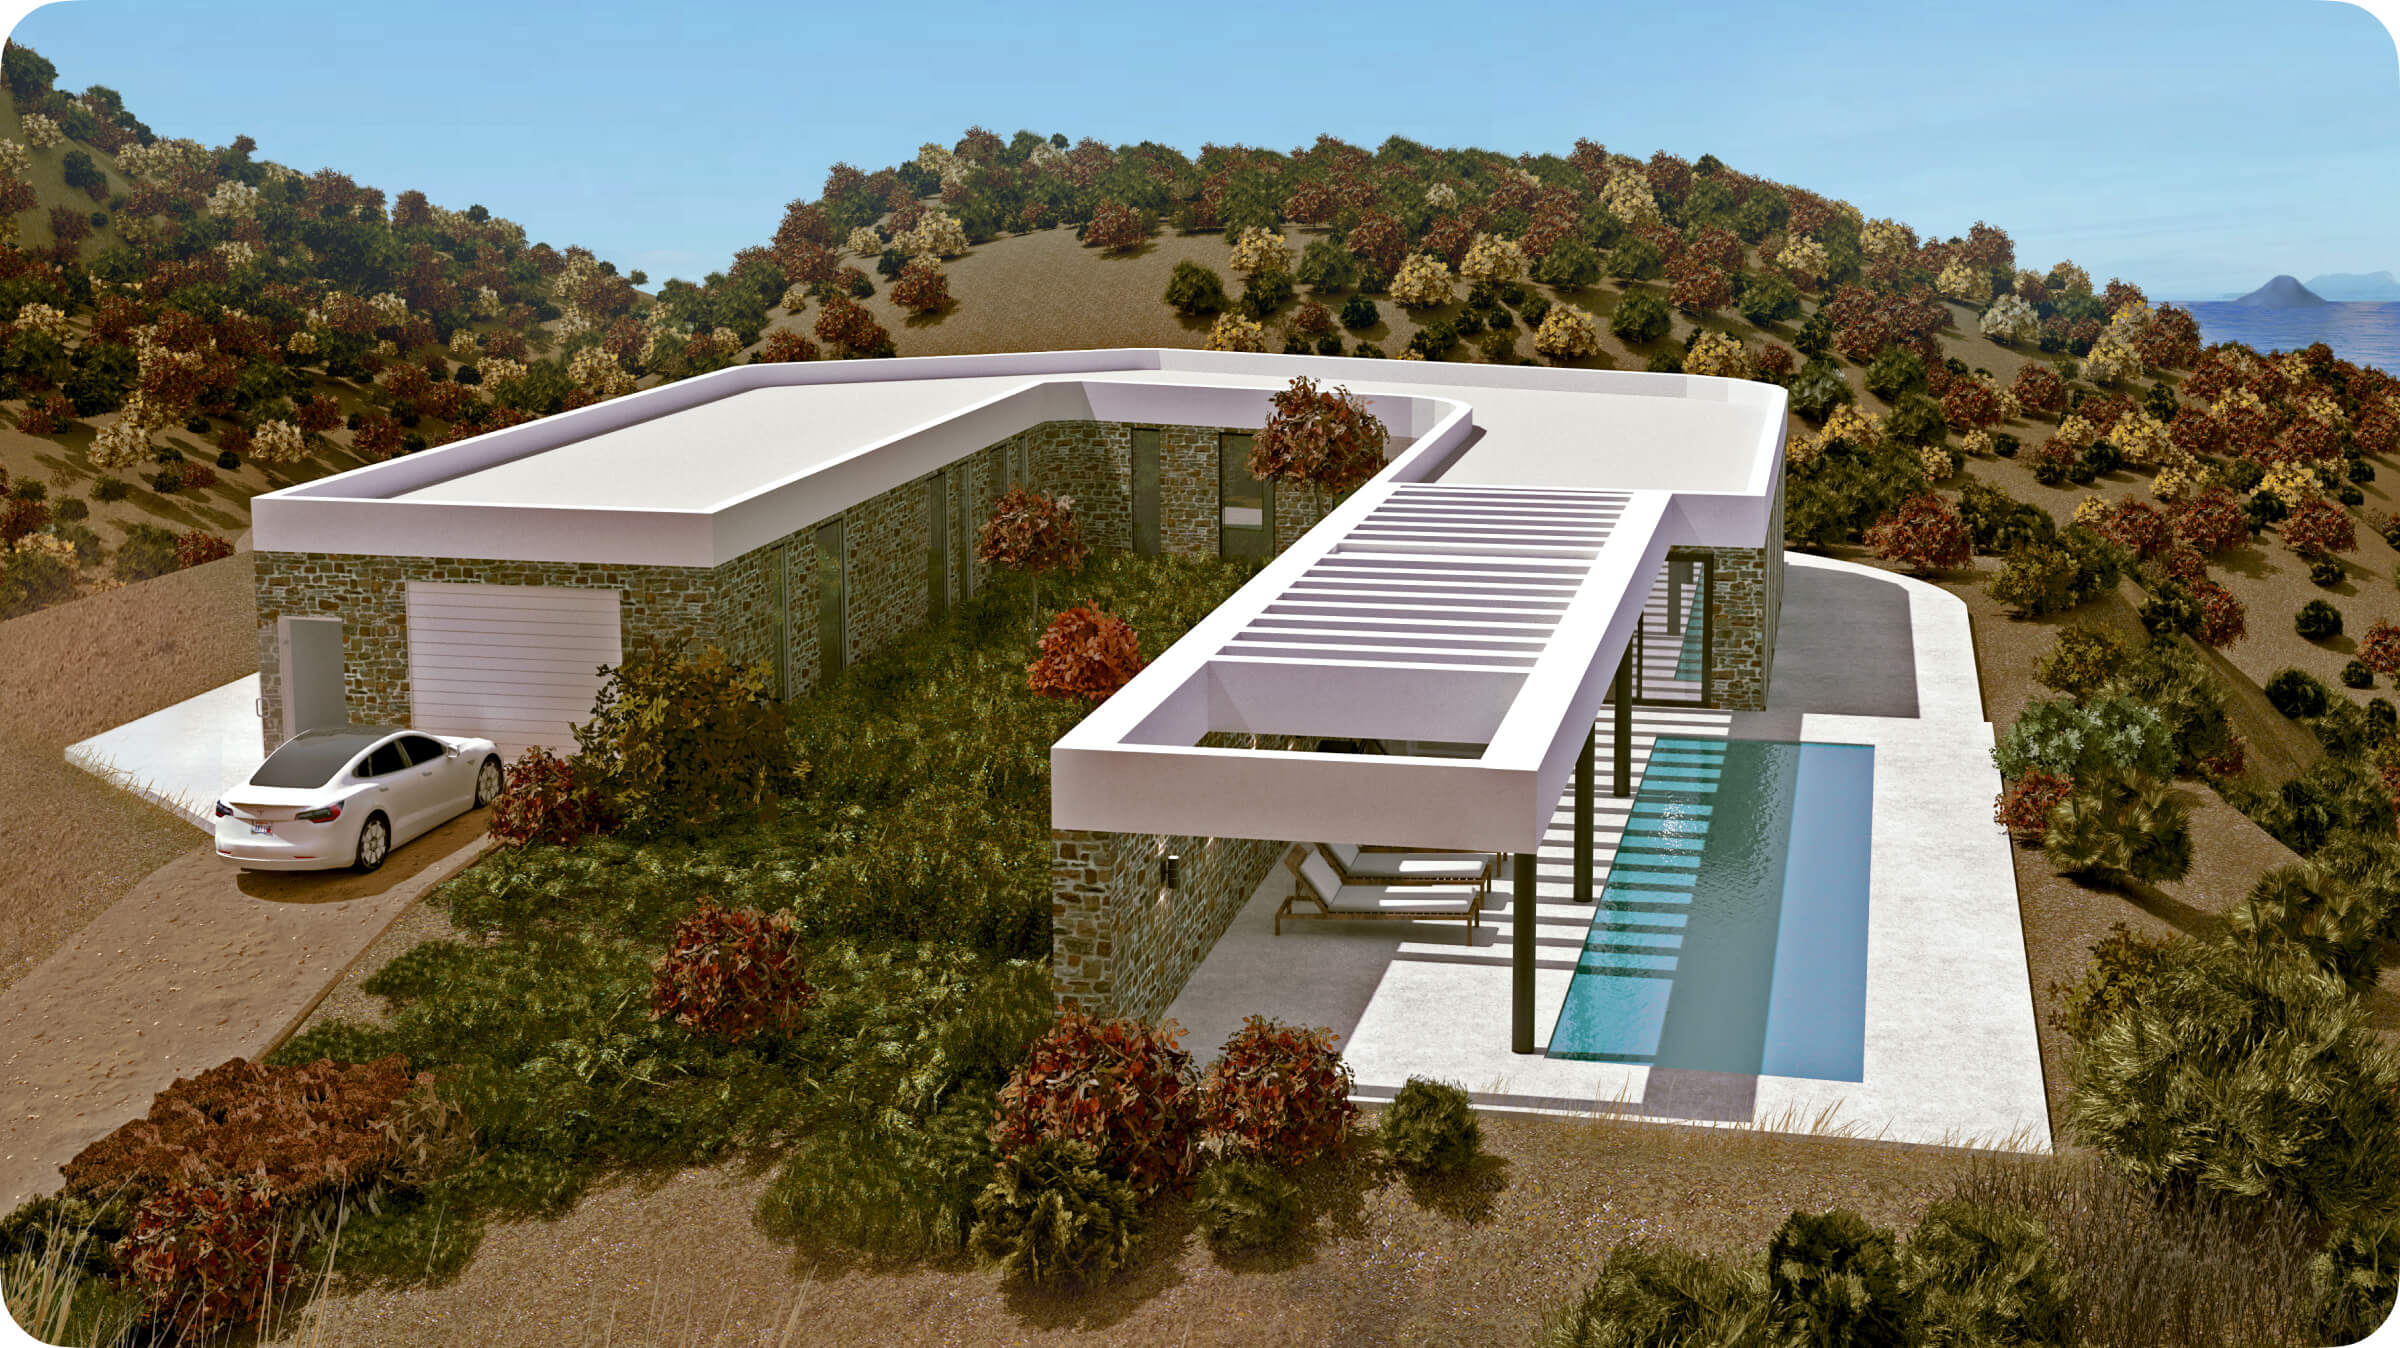 A house on the hills designed in Live Home 3D for Windows.